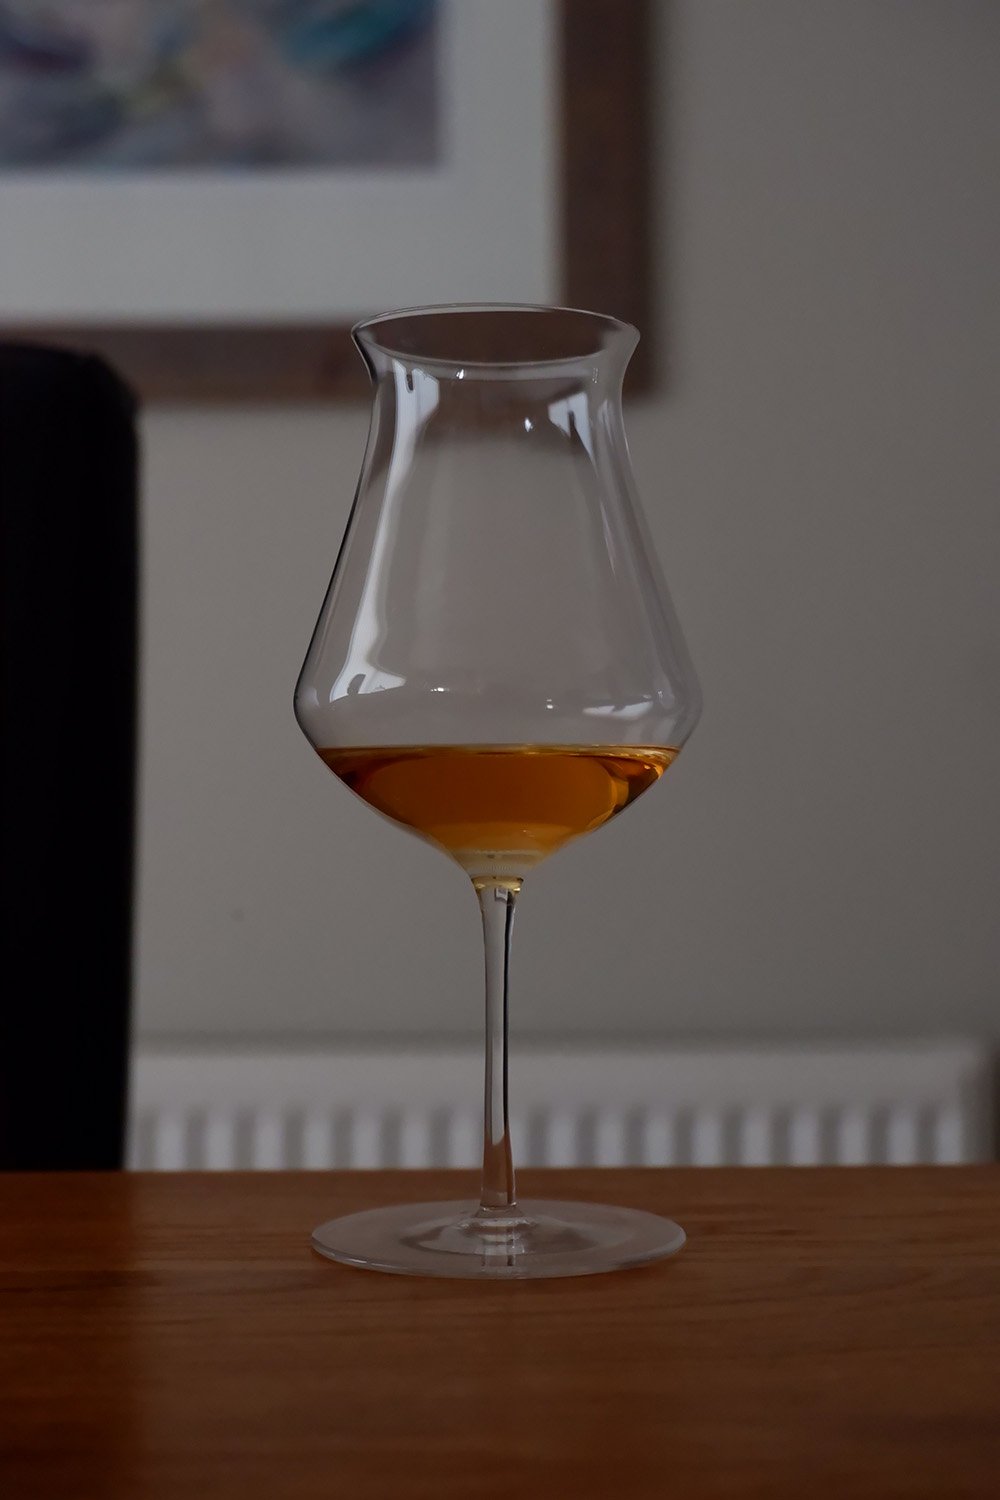 7 types of glasses to enjoy scotch, whisky and bourbon